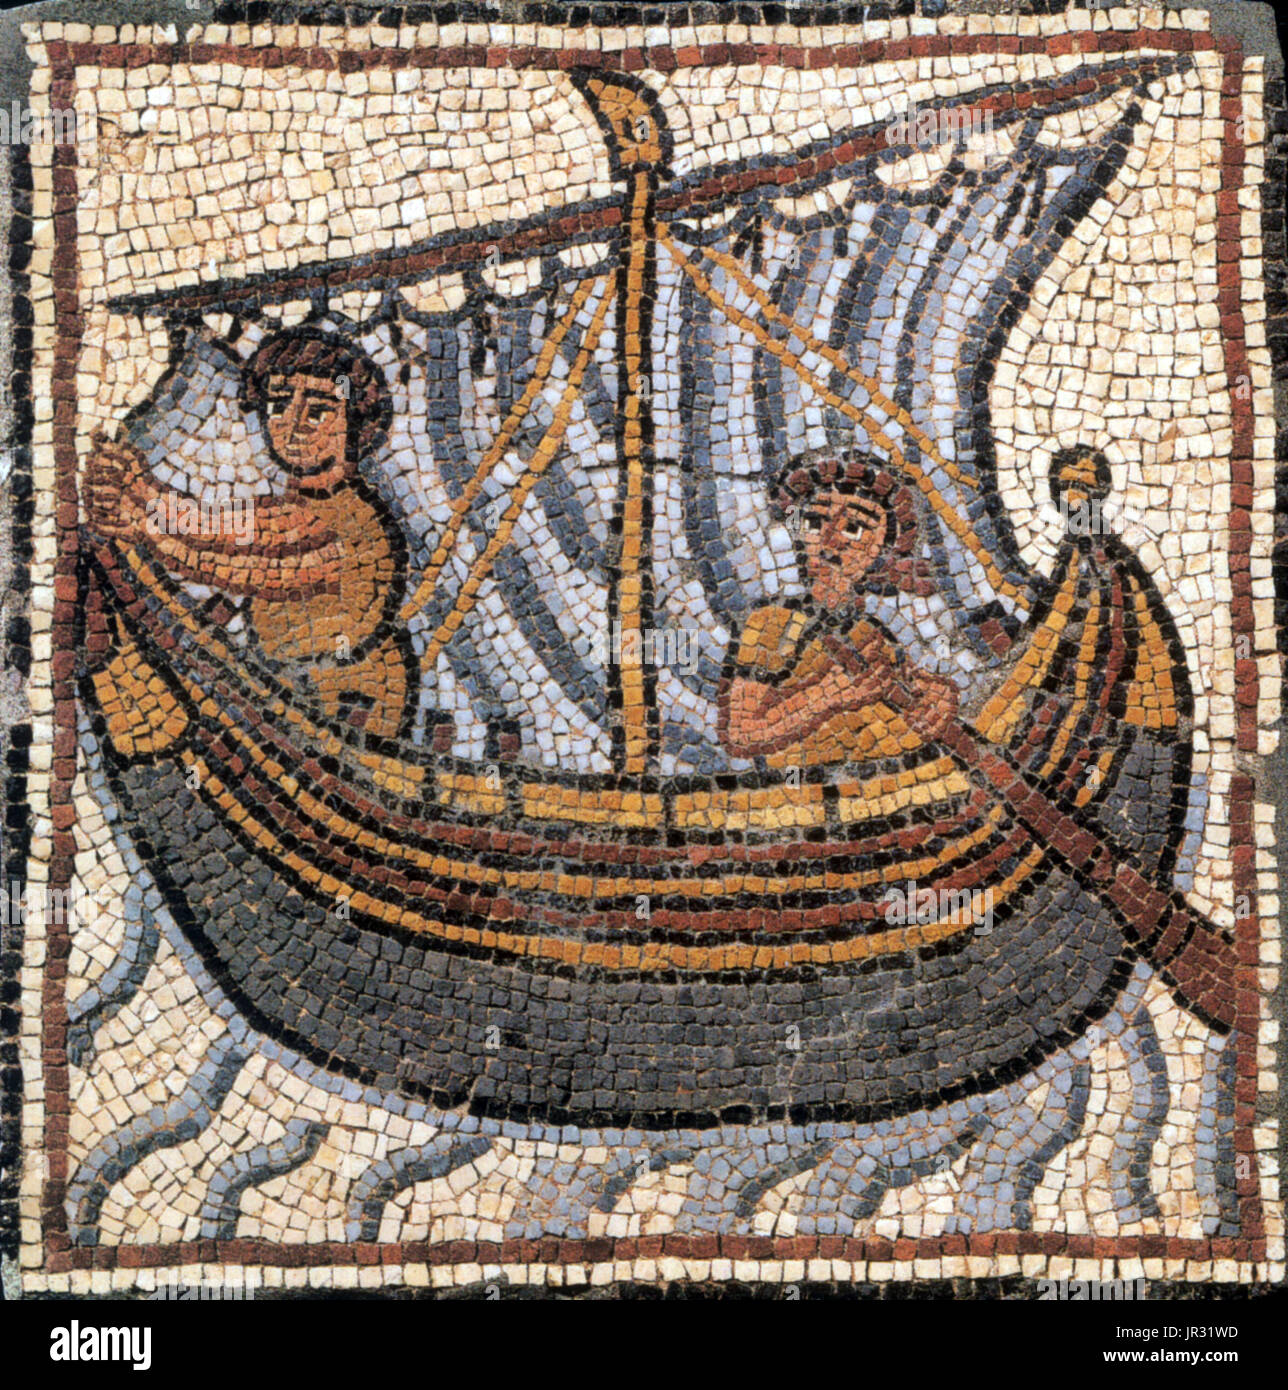 Byzantine Mosaic, Sailboat. Theodorias (modern Qasr Libya) was a Byzantine city in the Cyrenaica, founded in 539 by the emperor Justinian and named in honor of his wife, the Empress Theodora. The history of Qasr Libya goes back to the Greek period (4th century BC), when it was called Olbia. The complex contained two churches: the eastern church, discovered in 1957, and the western church, discovered in 1964. The mosaics were excavated from the nearby eastern church after they were discovered by Libyan laborers. The collection contains 50 panels, mostly of animals, gods, goddesses, nymphs, and  Stock Photo